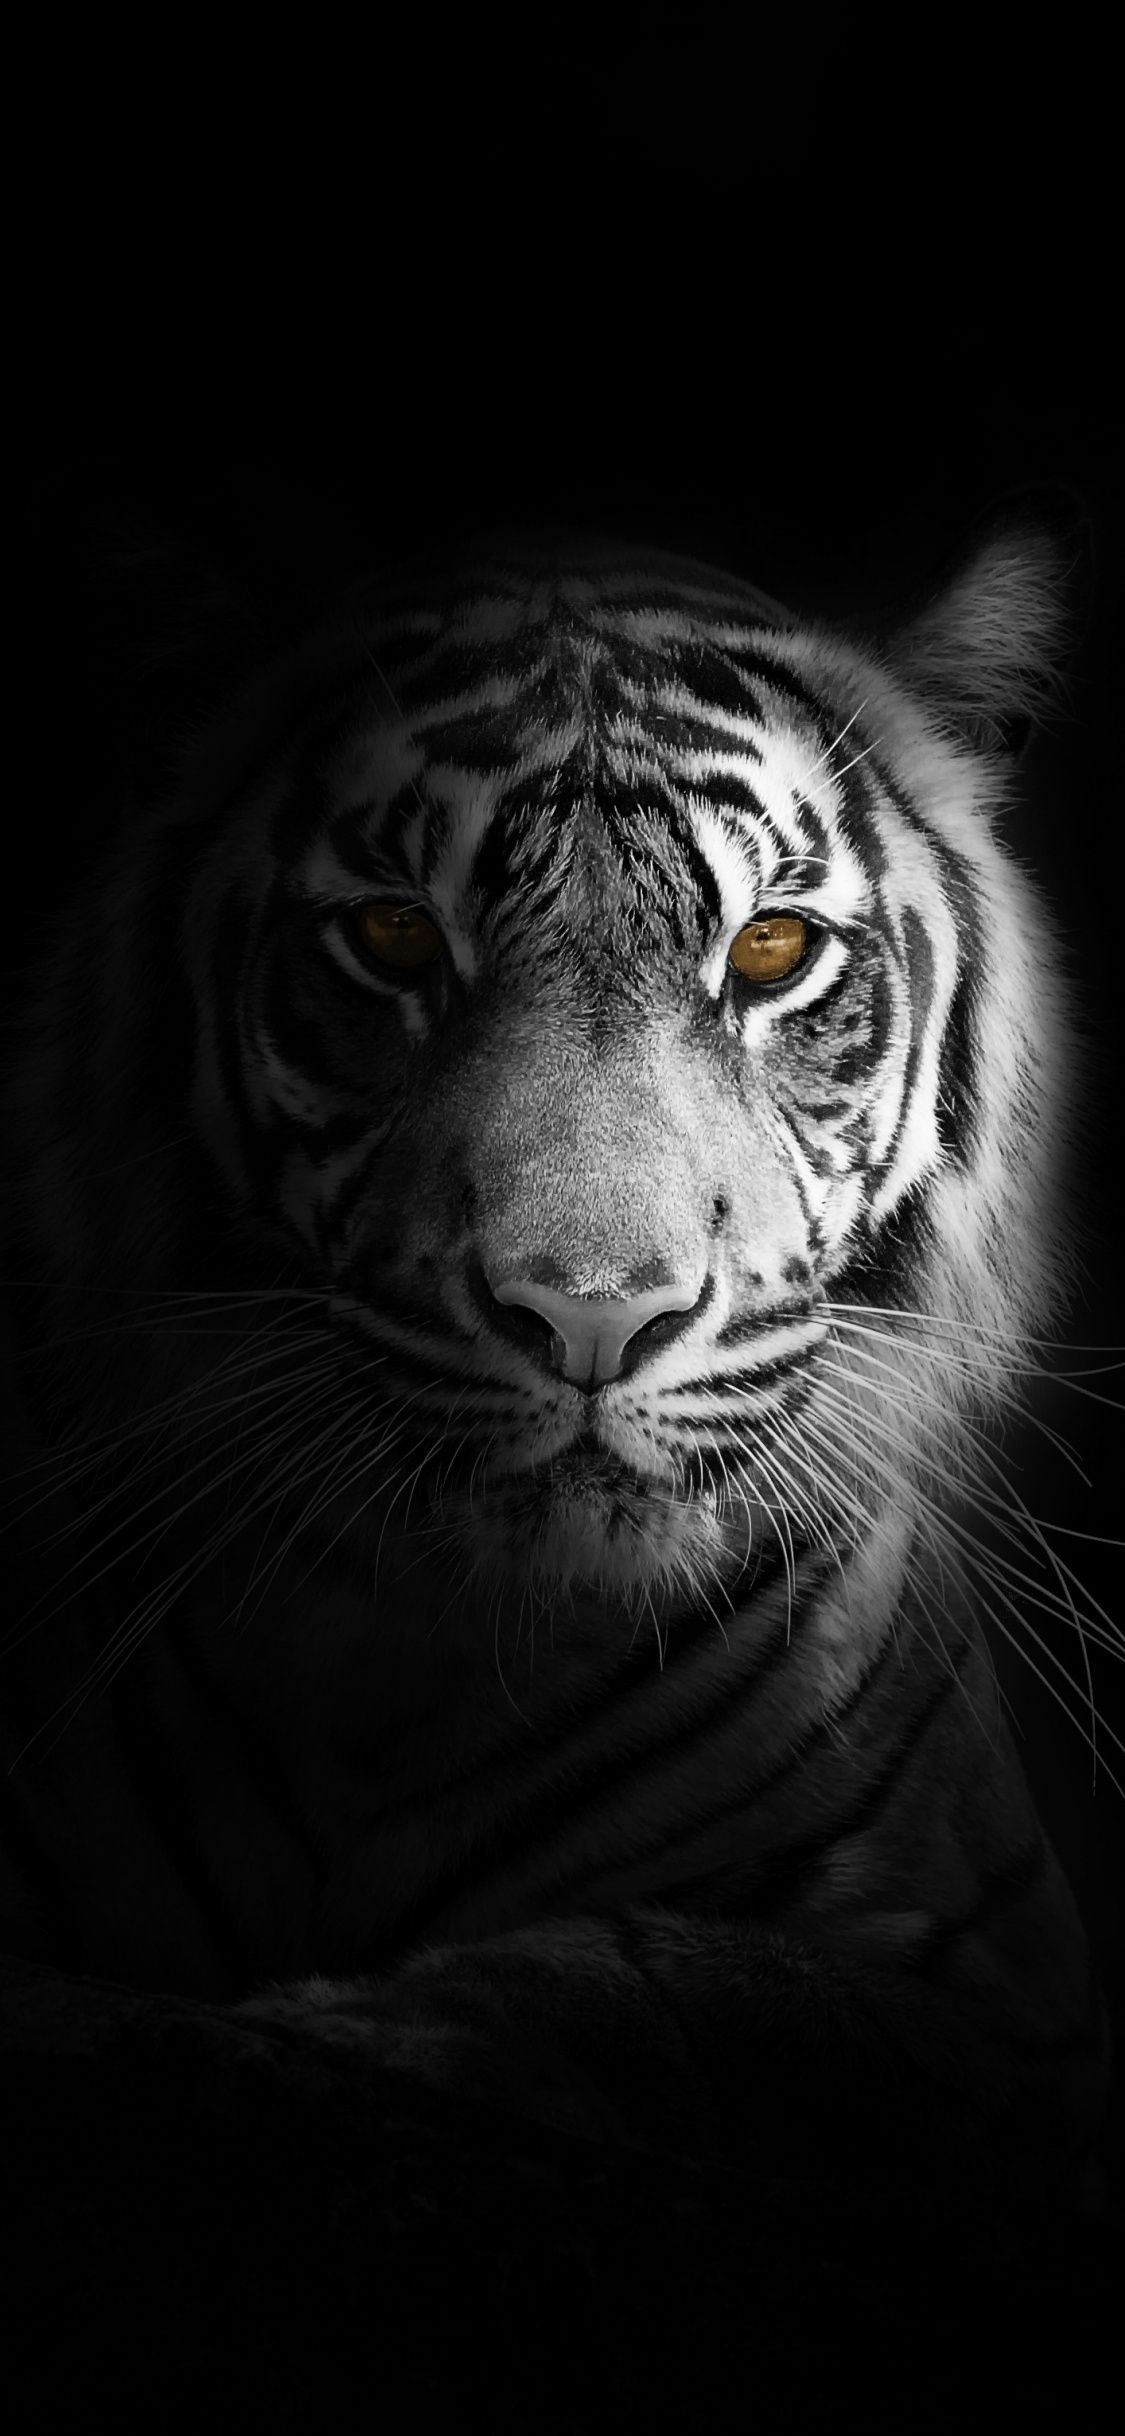 White Tiger iPhone Wallpapers - Wallpaper Cave